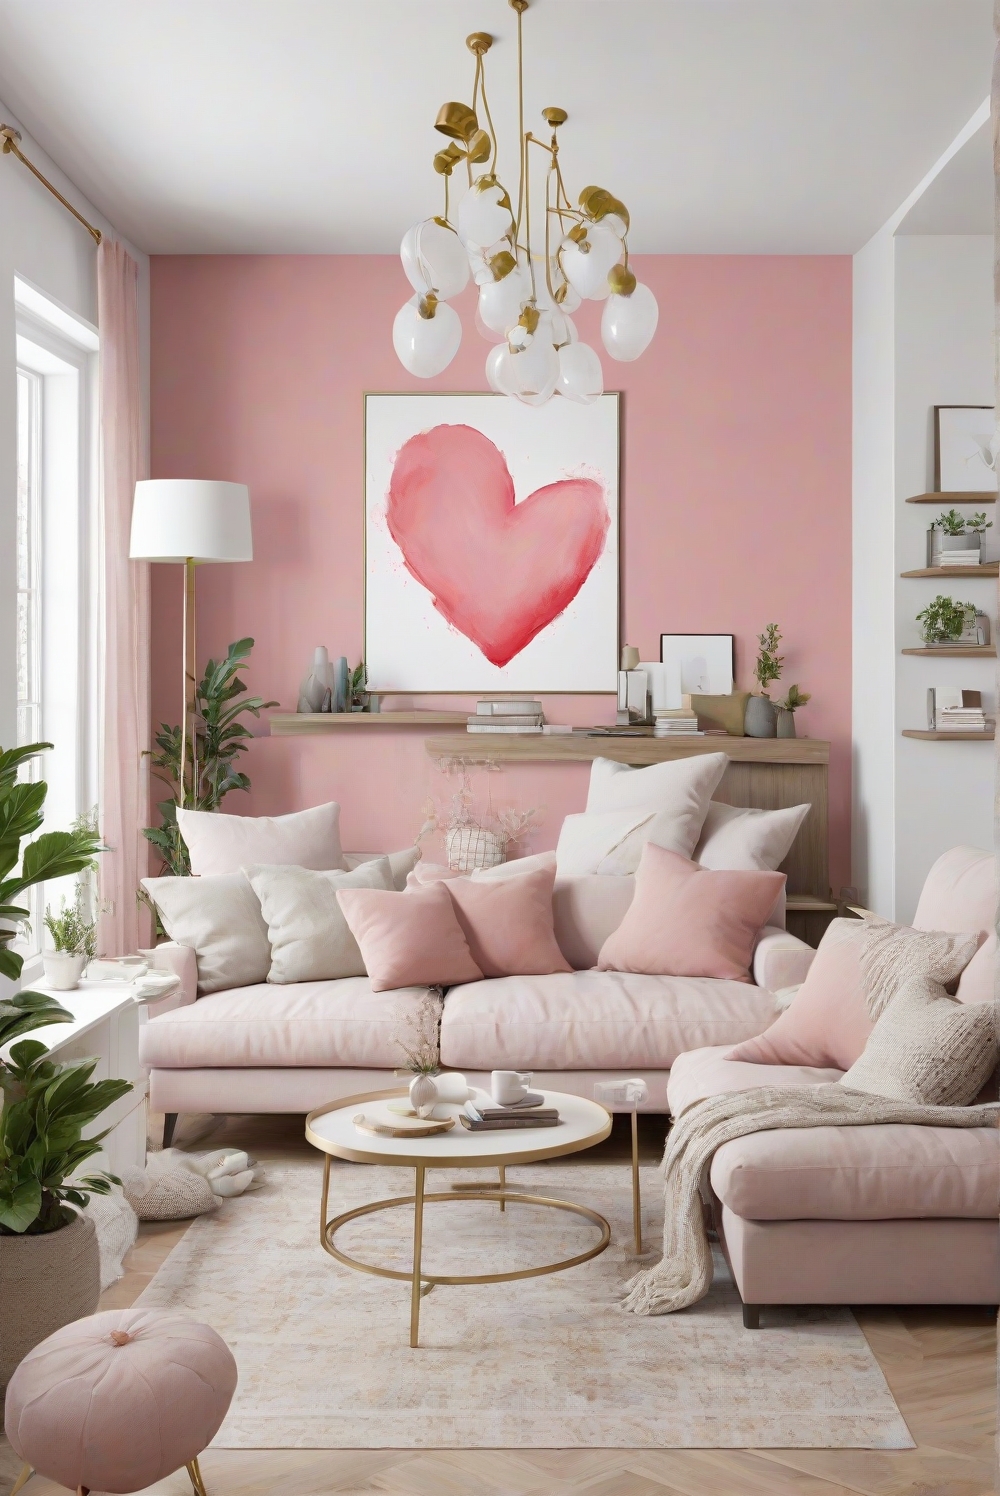 Cheating heart paint, mysterious paint, dark paint, best paint 2024, paint color suggestions, dark wall painting, mysterious home decor Home decorating, home interior design, interior design space planning, interior bedroom design, kitchen designs, living room interior, designer wall paint